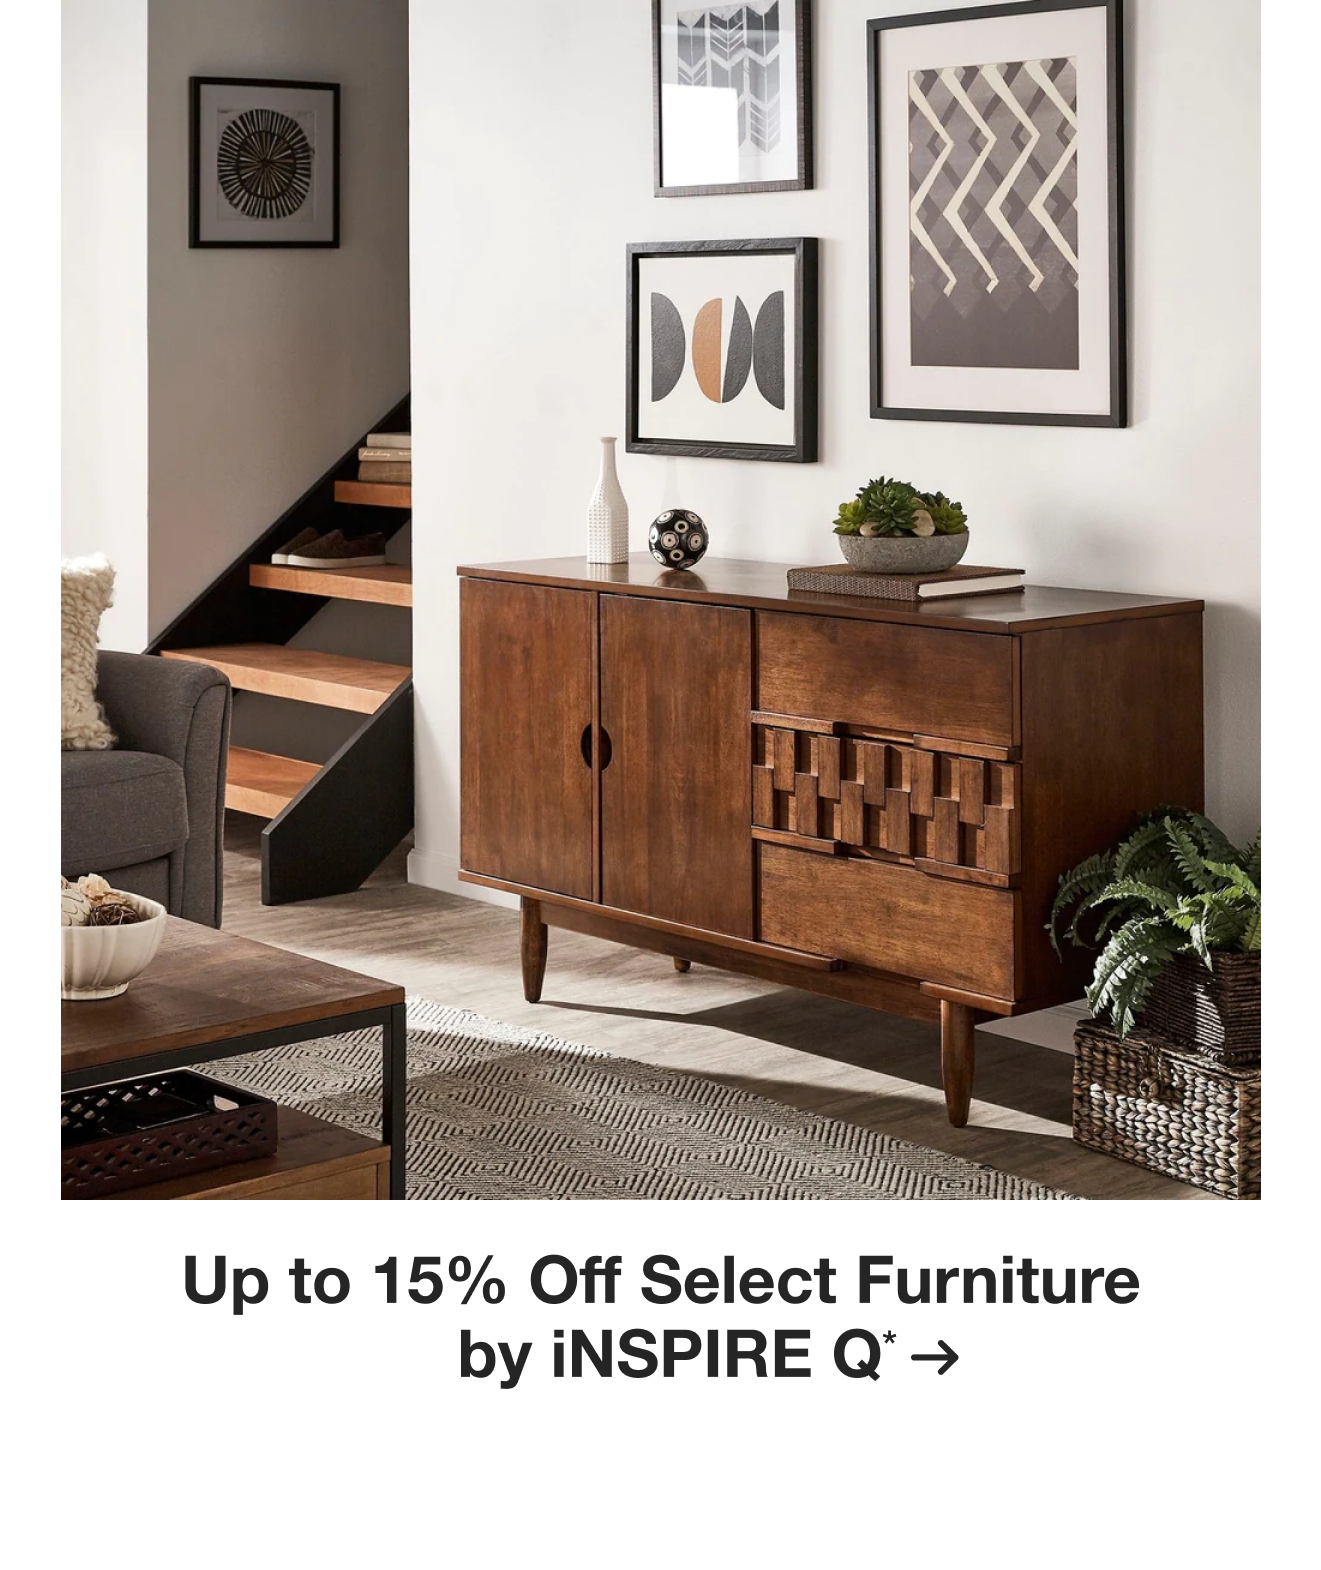 Up to 15% Off Select Furniture by iNSPIRE Q*